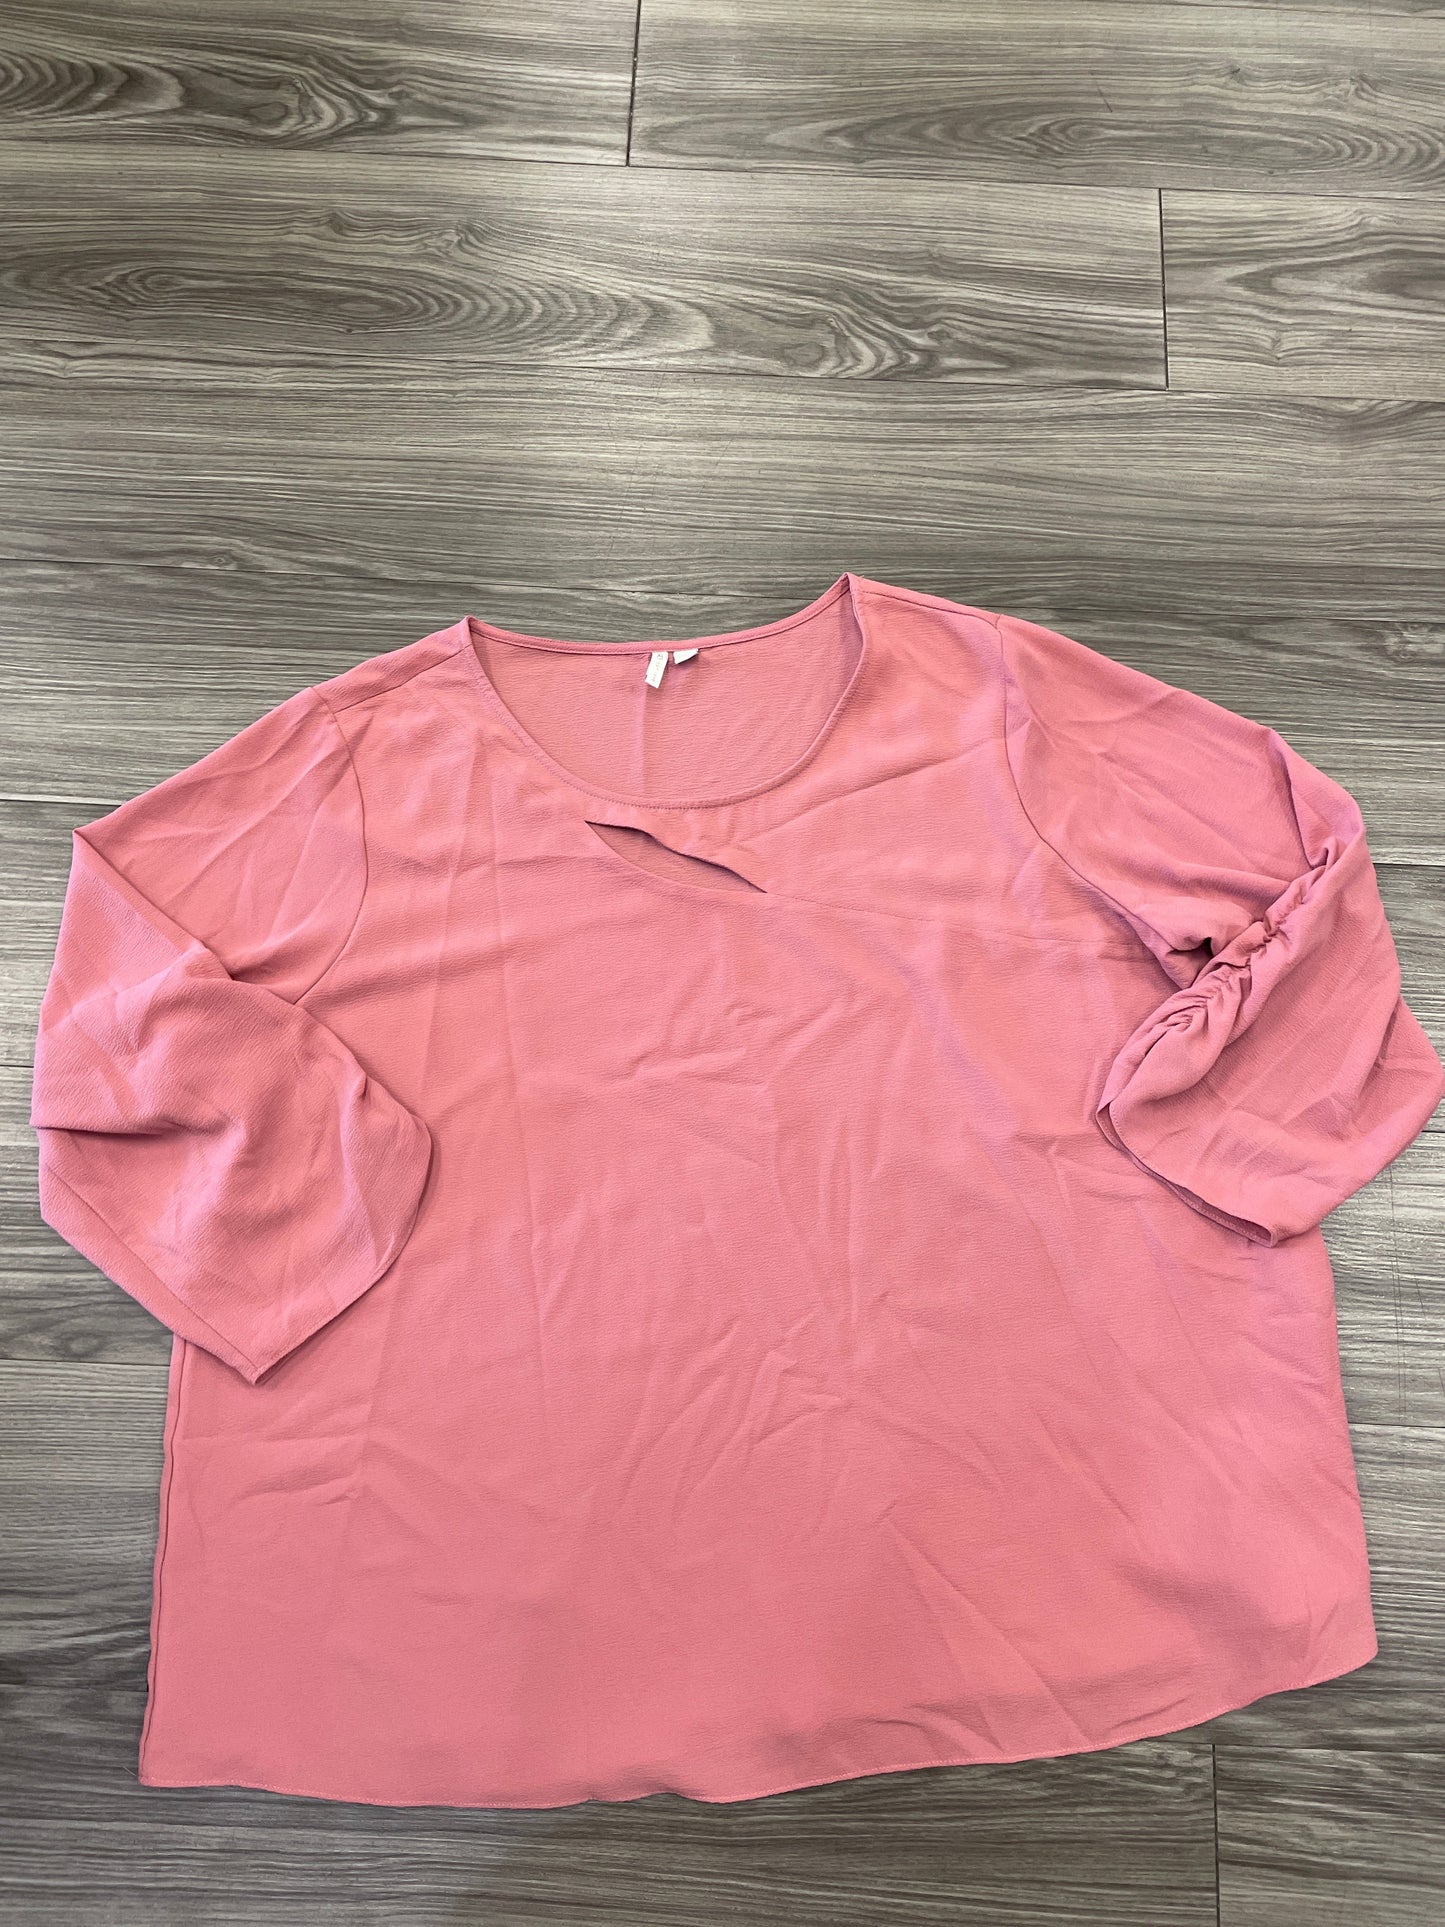 Pink Top Long Sleeve Cato, Size 2x